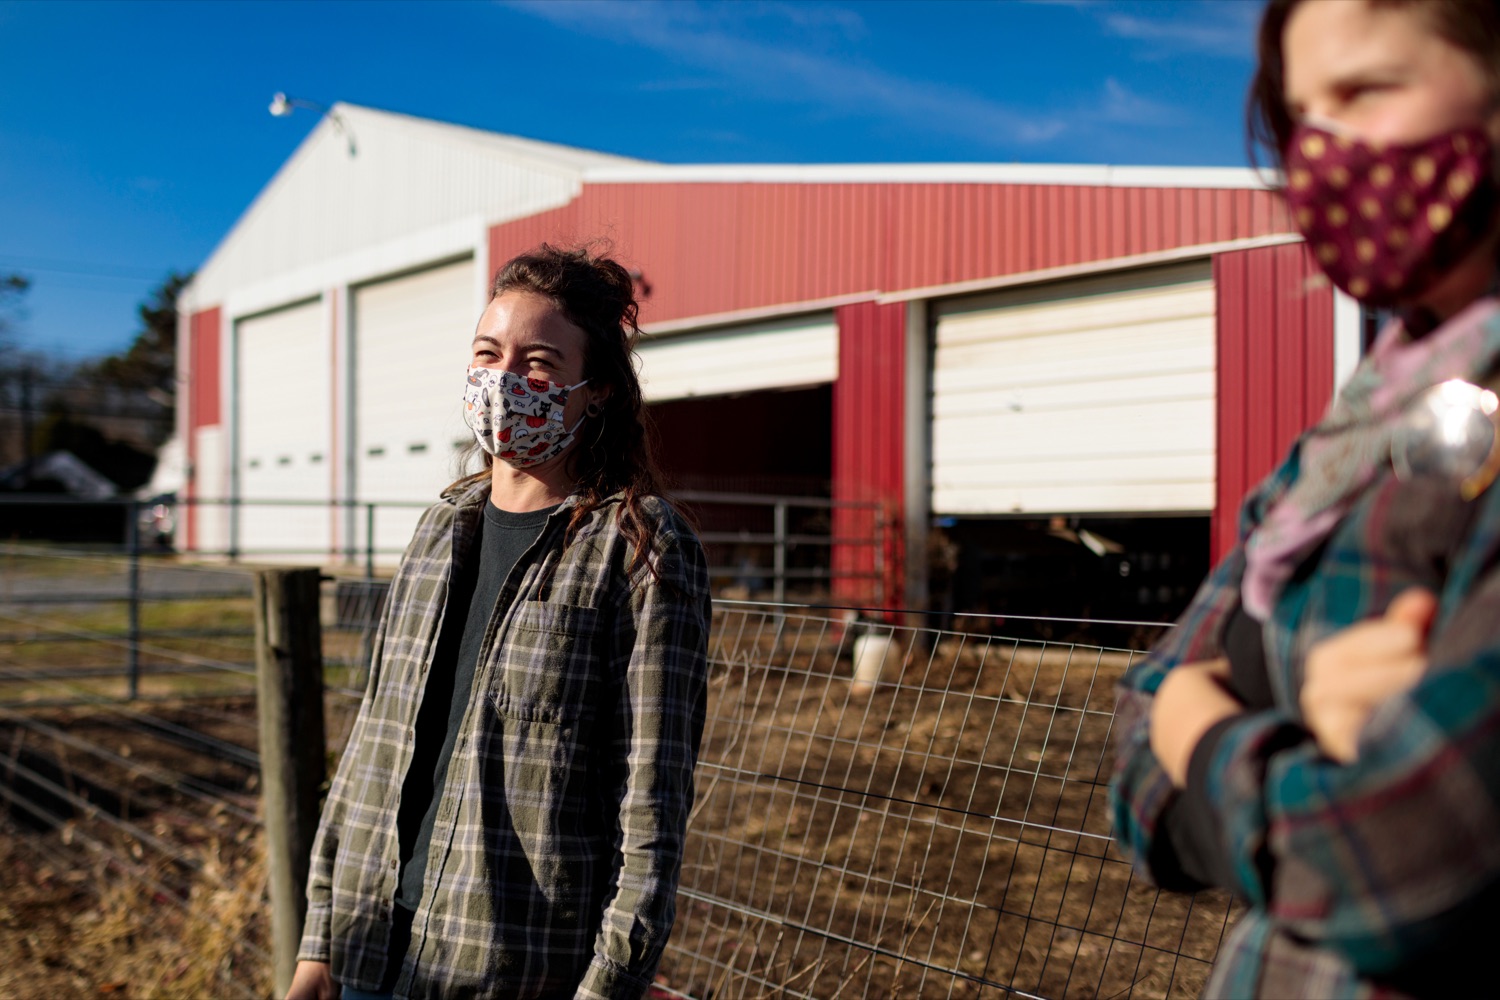 Crooked Row Farm farm hands Jessi Lee Ross, 30, left, and Andeana Gonzales 31, laugh together on the farm in Orefield on Friday, November 20, 2020.<br><a href="https://filesource.amperwave.net/commonwealthofpa/photo/18325_AGRIC_Farm_Show_NK_002.jpg" target="_blank">⇣ Download Photo</a>